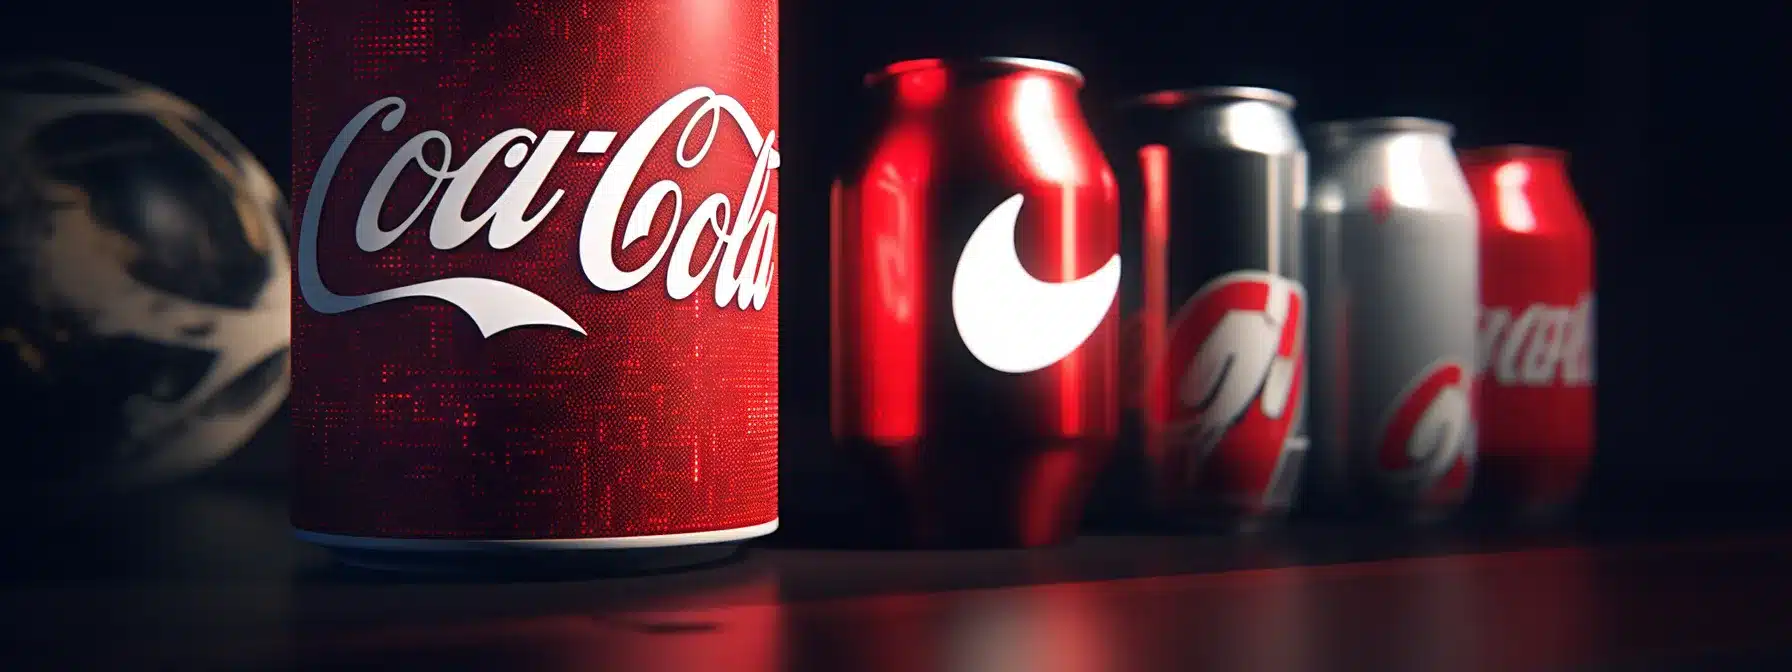 A Close-Up View Of Product Packaging From Coca-Cola, Apple, And Nike, Showcasing Their Consistent Brand Identities.